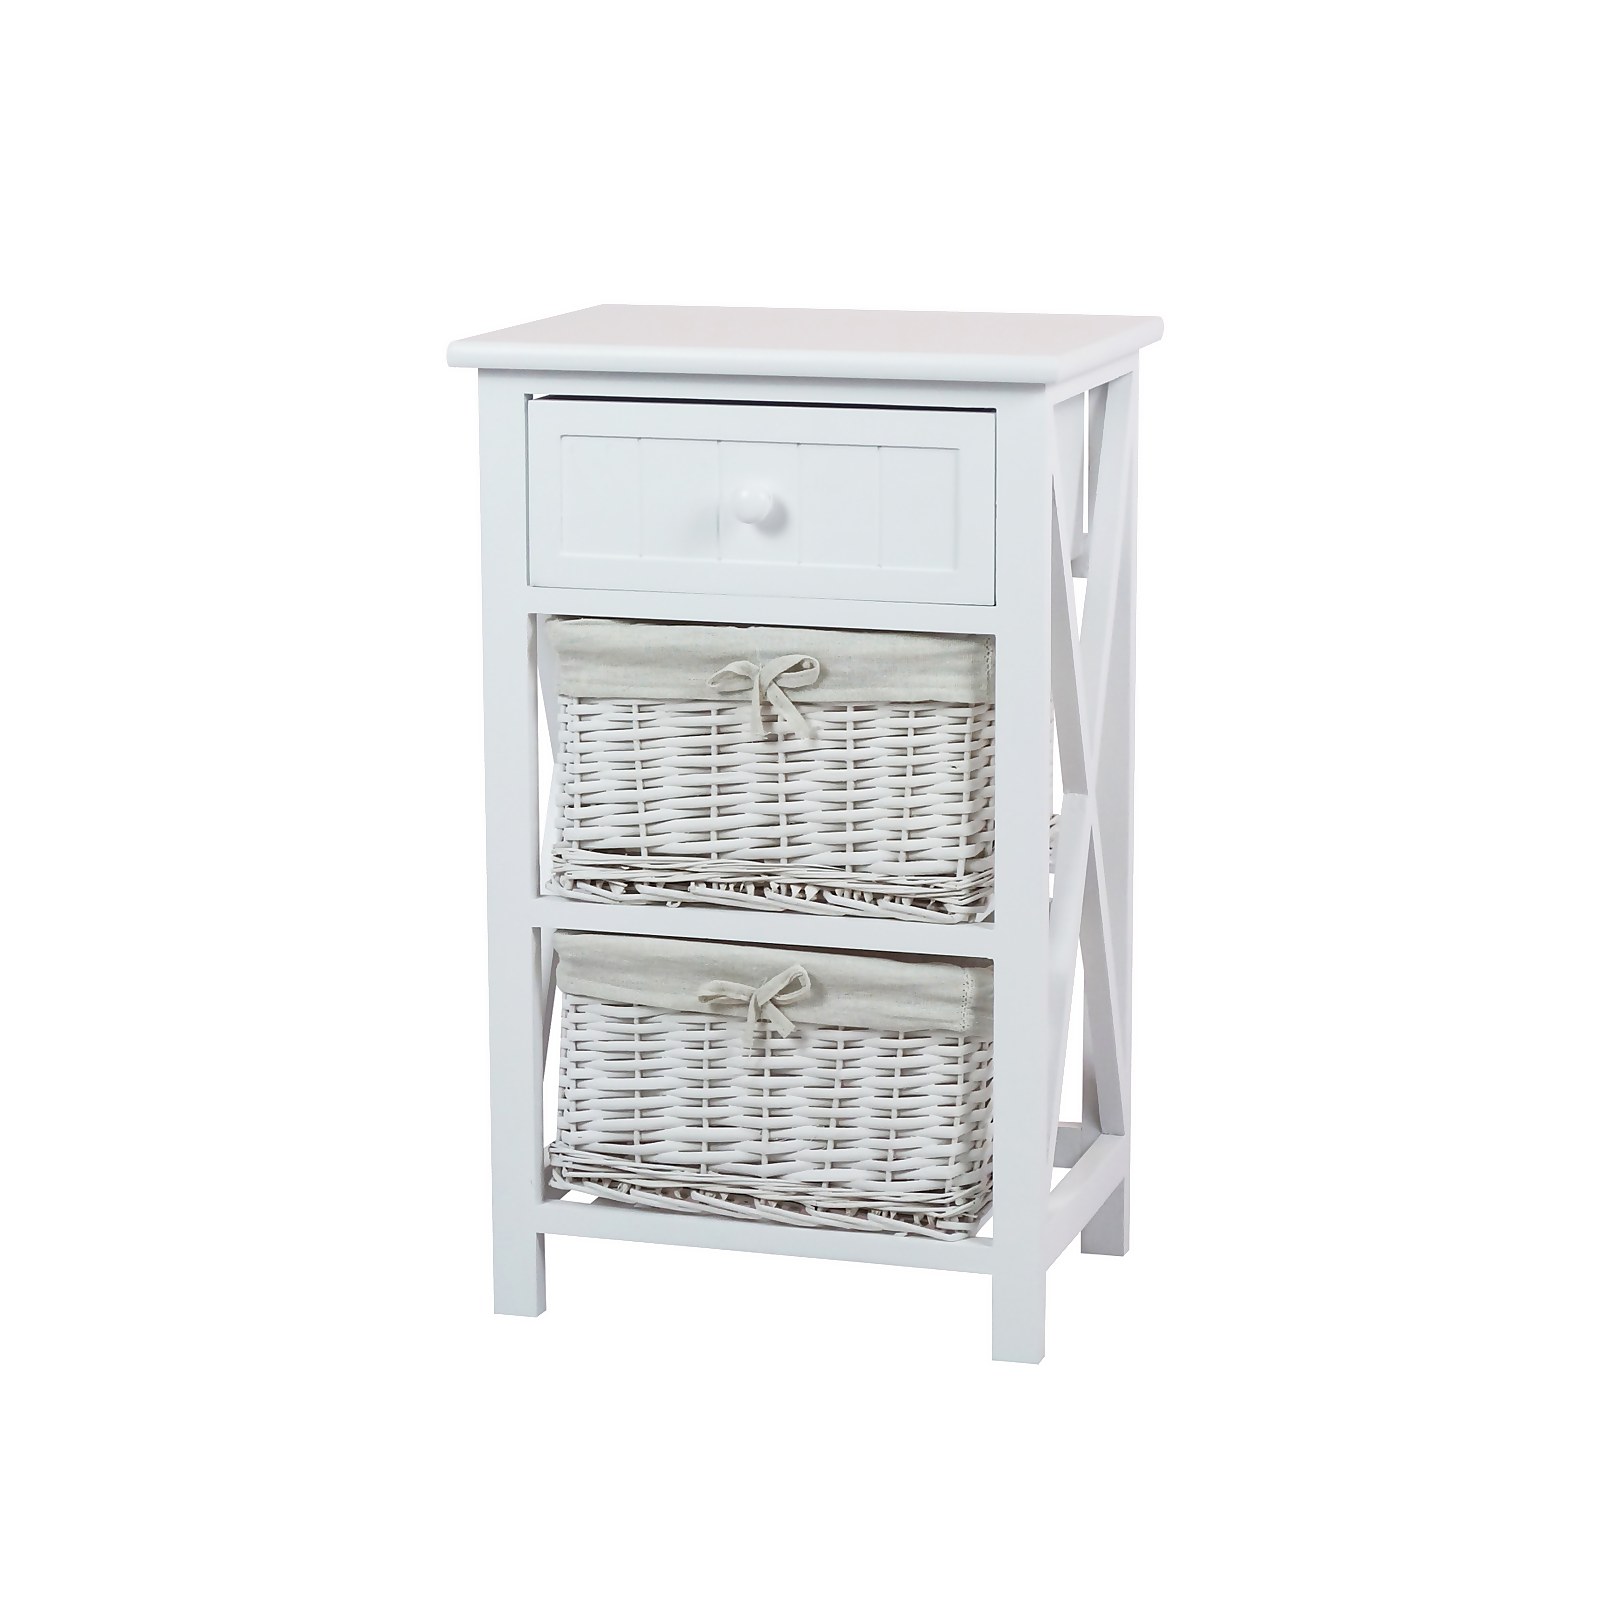 Photo of Classic White Bathroom Storage Unit - Wooden & Willow Drawers